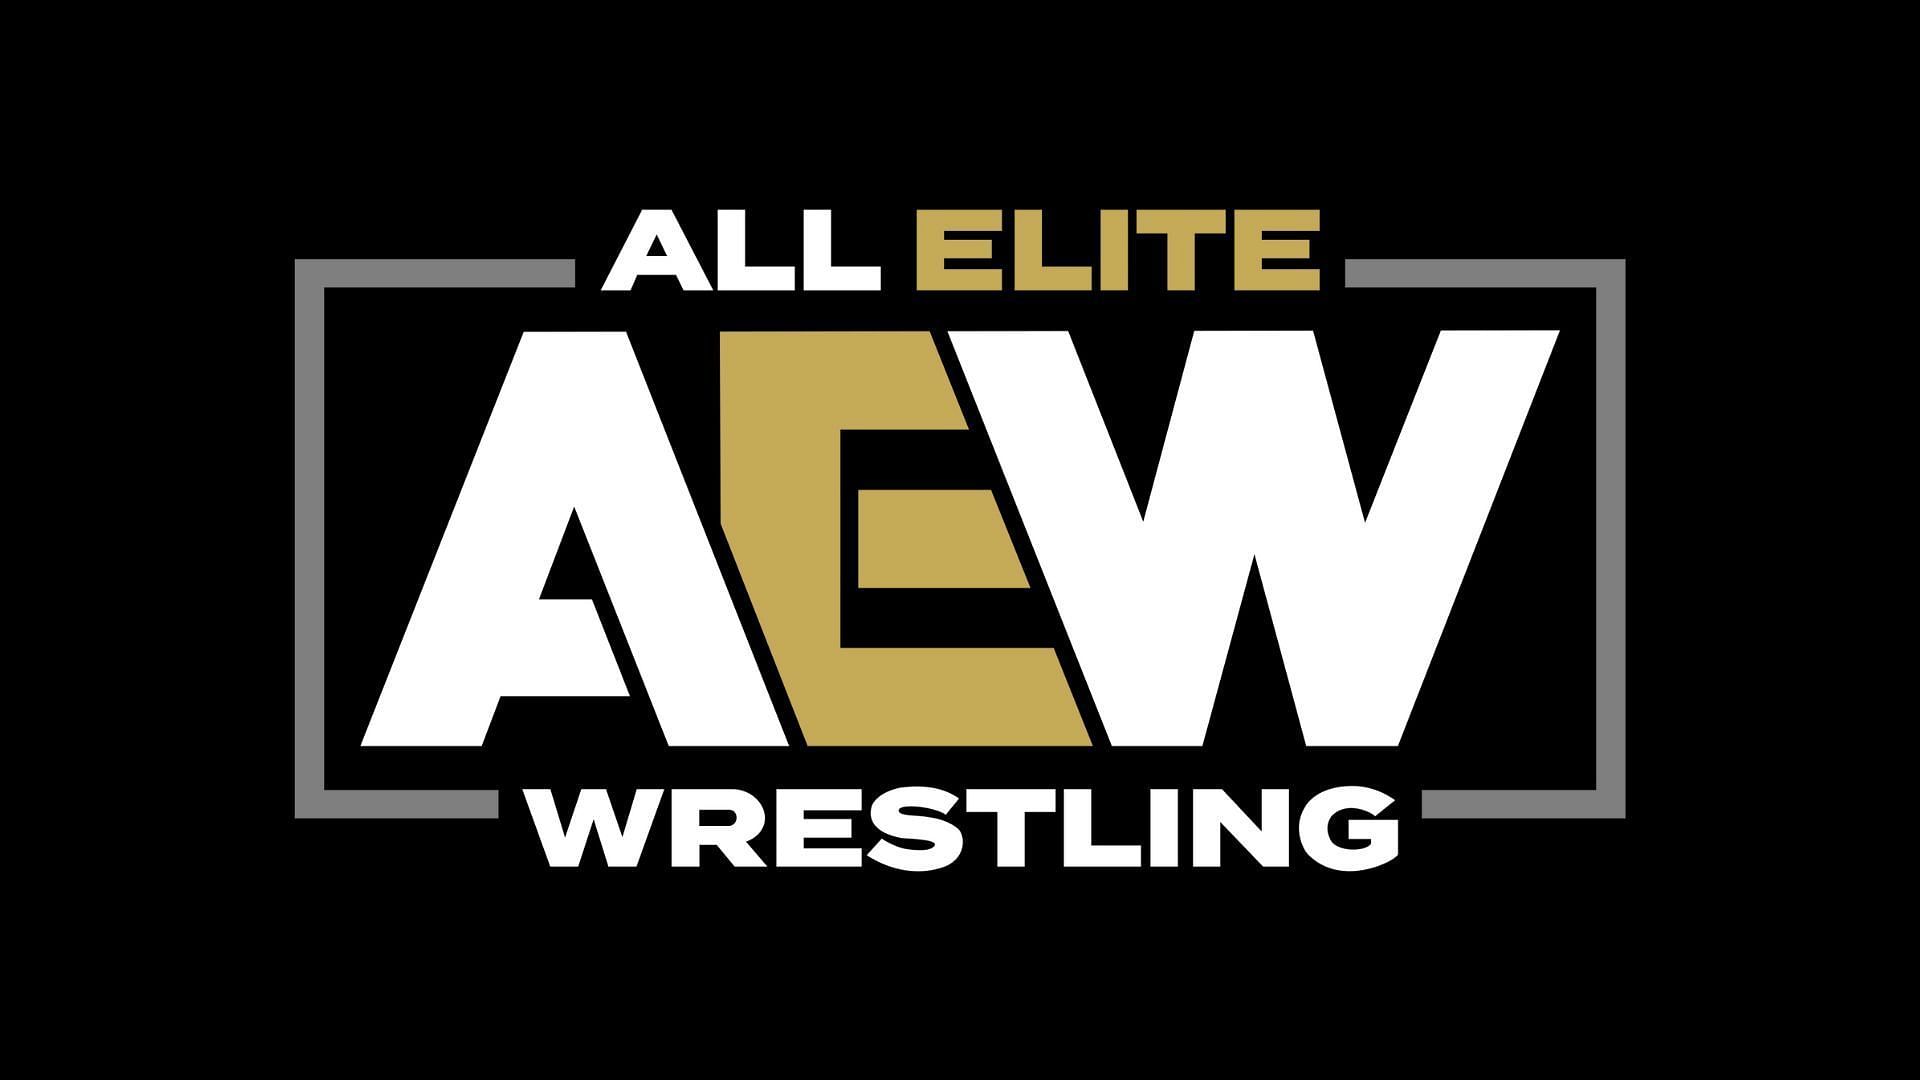 AEW was founded on January 1st, 2019